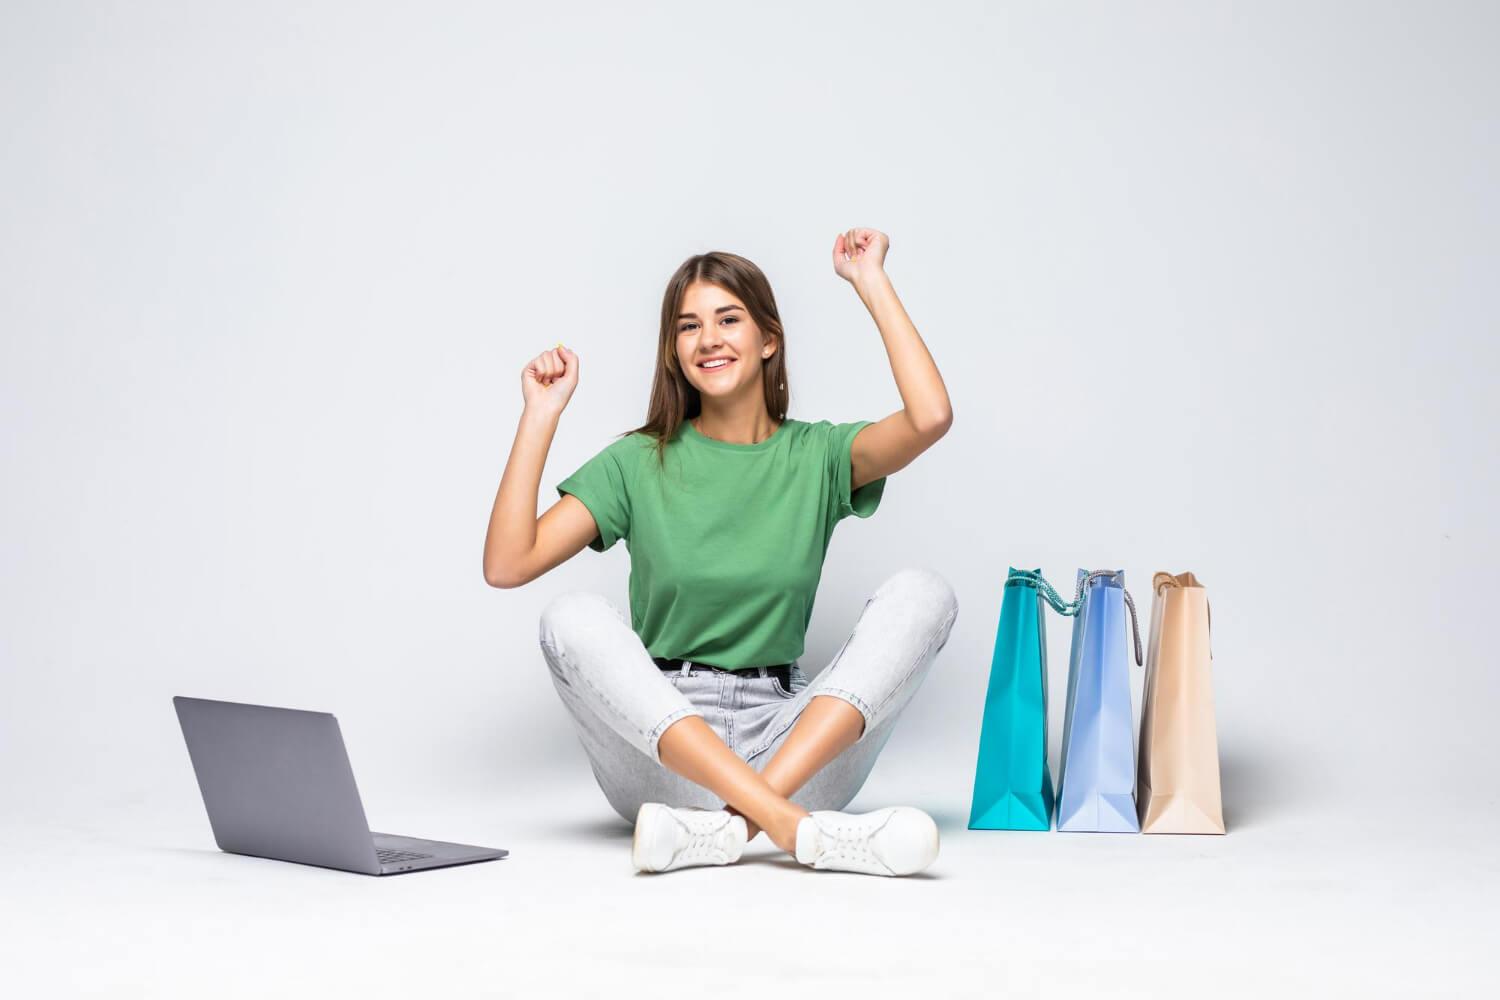 Alt Image: "Excited Girl Surrounded by Shopping Bags, Sitting Between Laptop and Fashion Finds" Title: "Thrilled by Fashion Discoveries: Girl Embraces Shopping Excitement Amidst Laptop and Bags" Caption: "Unleashing Fashion Enthusiasm: Girl's joy radiates as she sits amidst shopping bags and a laptop" Description: "This delightful image captures the pure excitement of a girl surrounded by shopping bags, seated between a laptop and her newfound fashion treasures. With a beaming smile on her face, she embodies the joy and fulfillment that comes from indulging in a shopping spree. The laptop represents the digital realm of online shopping, enabling her to explore a vast array of fashion options. The shopping bags scattered around her symbolize her successful purchases and her passion for fashion. The image reflects her enthusiasm as she eagerly unveils her fashion finds, discovering new styles and embracing her personal sense of style. It portrays the connection between technology, retail therapy, and personal expression. This image serves as a reminder of the happiness that accompanies fashion exploration, highlighting the empowerment and self-confidence that comes from curating one's wardrobe. It encapsulates the joyous moments that fashion enthusiasts experience, as they embark on their fashion journey and uncover hidden gems." AIPRM - ChatGPT Prompts Favorites AIPRM Public Own Hidden Add List Topic All Activity All Sort by Top Votes Trending Model Not specific Search Prompts per Page 12 Showing 1 to 12 of 3636 Prompts Prev Next Human Written |100% Unique |SEO Optimized Article SEO / Writing · Jumma · 21 hours ago GPT-3.5-turbo GPT-4 Human Written | Plagiarism Free | SEO Optimized Long-Form Article With Proper Outline [Upgraded Version] 4.9M 3.7M 10.3K Midjourney Prompt Generator Generative AI / Midjourney · kenny · 3 months ago Outputs four extremely detailed midjourney prompts for your keyword. 1.4M 879.3K 5.3K Fully SEO Optimized Article including FAQ's SEO / Writing · Muhammad Talha (MTS) · 21 hours ago GPT-3.5-turbo GPT-4 [Version: 2.9.1] This prompts create 100% Unique | Plagiarism Free | SEO Optimized Title, | Meta Description | Headings with Proper H1-H6 Tags | up to a 2000 Words Article with FAQ's, and Conclusion. 1.6M 1.2M 4.3K Buyer Persona Legend Marketing / Marketing · RonGPT · 4 months ago Generate detailed User Personas for your Business with data neatly organized into a table. 256.6K 127.2K 4.0K Outrank Article SEO / Writing · AIPRM · 1 week ago GPT-3.5-turbo Outrank the competition with an in-depth, SEO-optimized article based on [YOUR COMPETITOR URL]. Be like your competition, just a little better ;-) 1.2M 854.0K 3.9K Keyword Strategy SEO / Ideation · AIPRM · 1 week ago GPT-3.5-turbo Create a keyword strategy and SEO content plan from 1 [KEYWORD] 1.0M 721.0K 3.7K Write a Complete Book in One Click Copywriting / Writing · Md Mejbahul Alam · 2 months ago Write a full book with different chapters 811.4K 506.6K 3.7K Write Best Smart Article Best to rank no 1 on Google Copywriting / Writing · Faisal Arain · 4 months ago Write Best Smart Article Best to rank no 1 on Google by just writing Title for required Post. If you like the results then please hit like button. 934.4K 643.9K 3.3K YouTube Script Creator Copywriting / Script Writing · WilliamCole · 4 months ago Create captivating script ideas for your YouTube videos. Enter a short description of your video. Generates: Title, Scene, and Entire Script. 662.1K 381.2K 3.3K Human-like Rewriter - V1.6 Copywriting / Writing · pneb · 4 months ago Re-write your ai-generated article with this tool! You can get up-to 90-100% Human Generated score! 1.0M 671.2K 3.3K Get Monthly Content Calendar In 1 Click Marketing / Marketing · Google Business Profile Services · 1 month ago Get a beautifully organized 4-week content calendar that targets your primary keyword using only transaction longtail keyword & clickbait style post titles. Try it out! 480.5K 280.3K 3.3K Smart and Detailed Article(H tags) [Updated] Copywriting / Writing · ContGPT · 1 week ago GPT-3.5-turbo GPT-4 Give the title of the article you want written. He tries to write a long and detailed article. It makes it ready for sharing with h tags. 615.3K 421.4K 2.3K Add Public Prompt Prompts per Page 12 Showing 1 to 12 of 3636 Prompts Prev Next Regenerate re